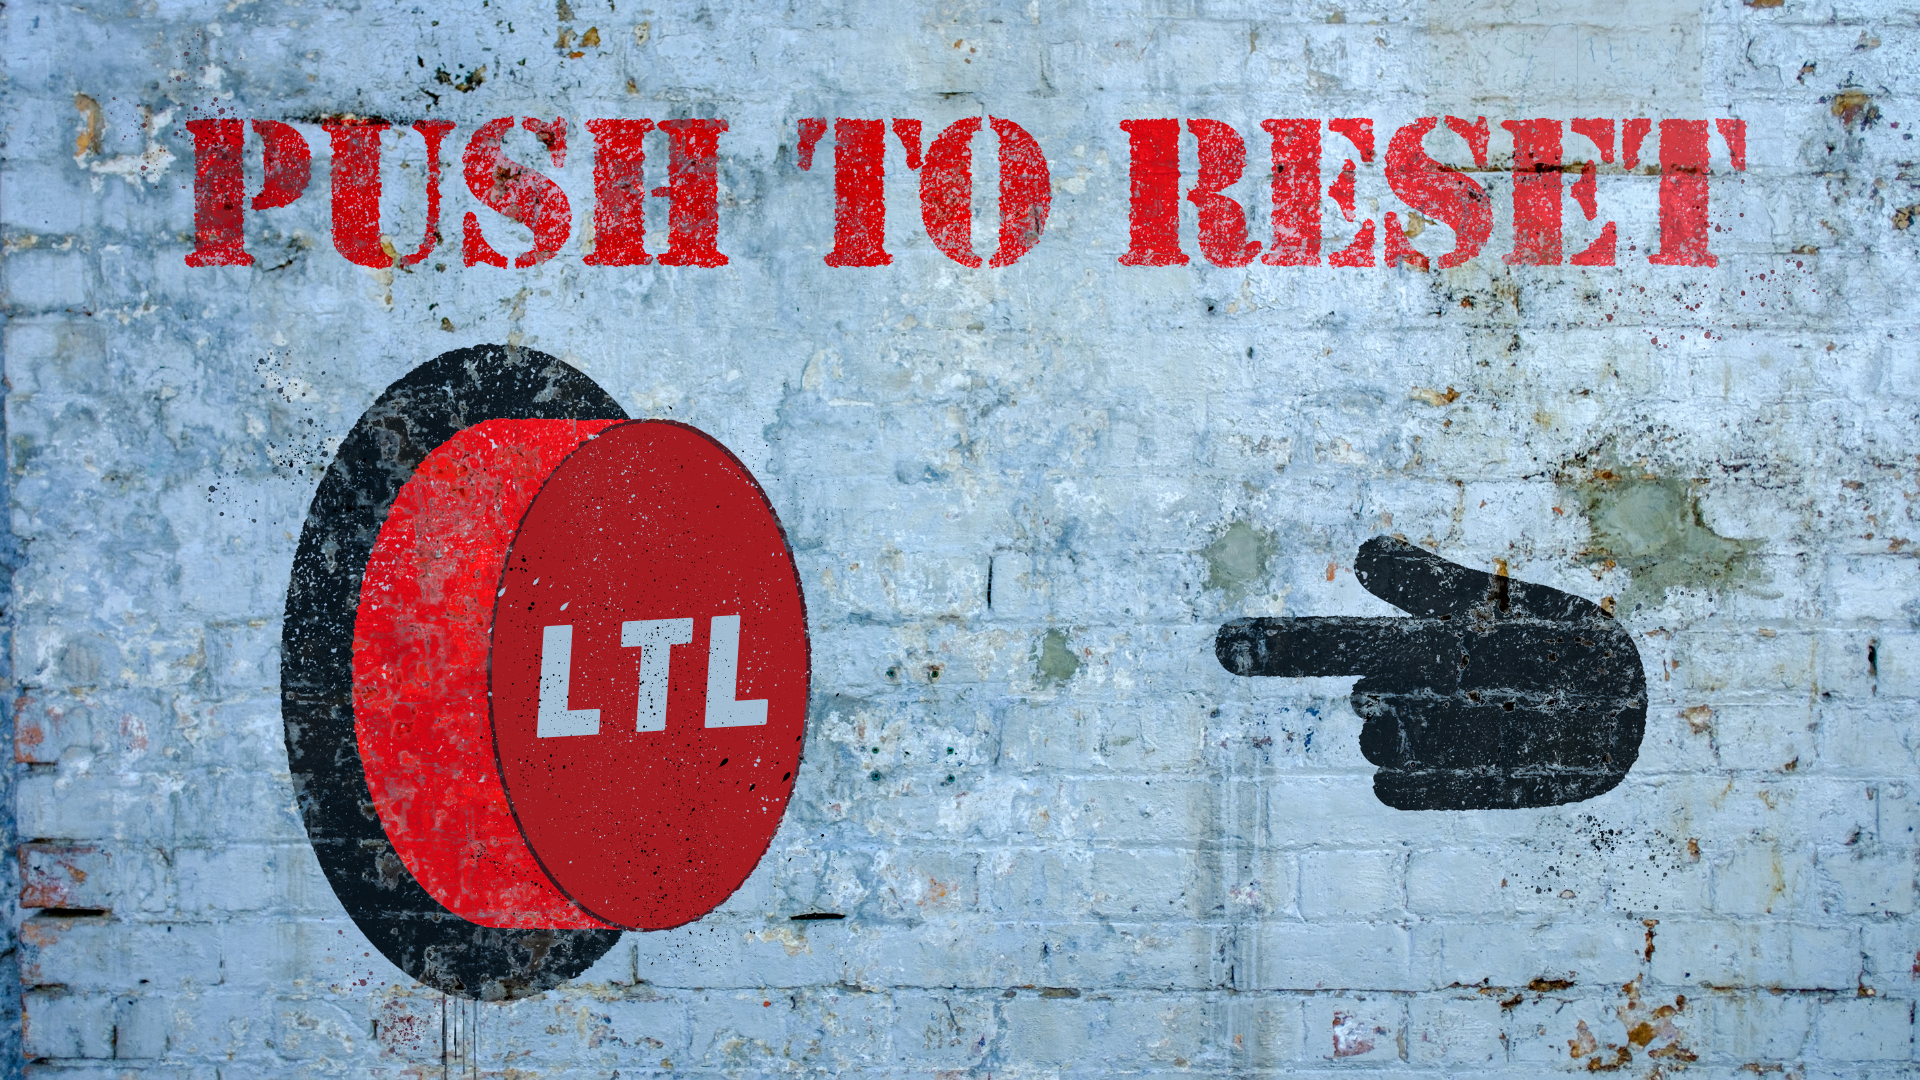 Graffitti written on a wall with the words" push to reset" over a button with the words "LTL" on it and a pointing finger prepared to click the button